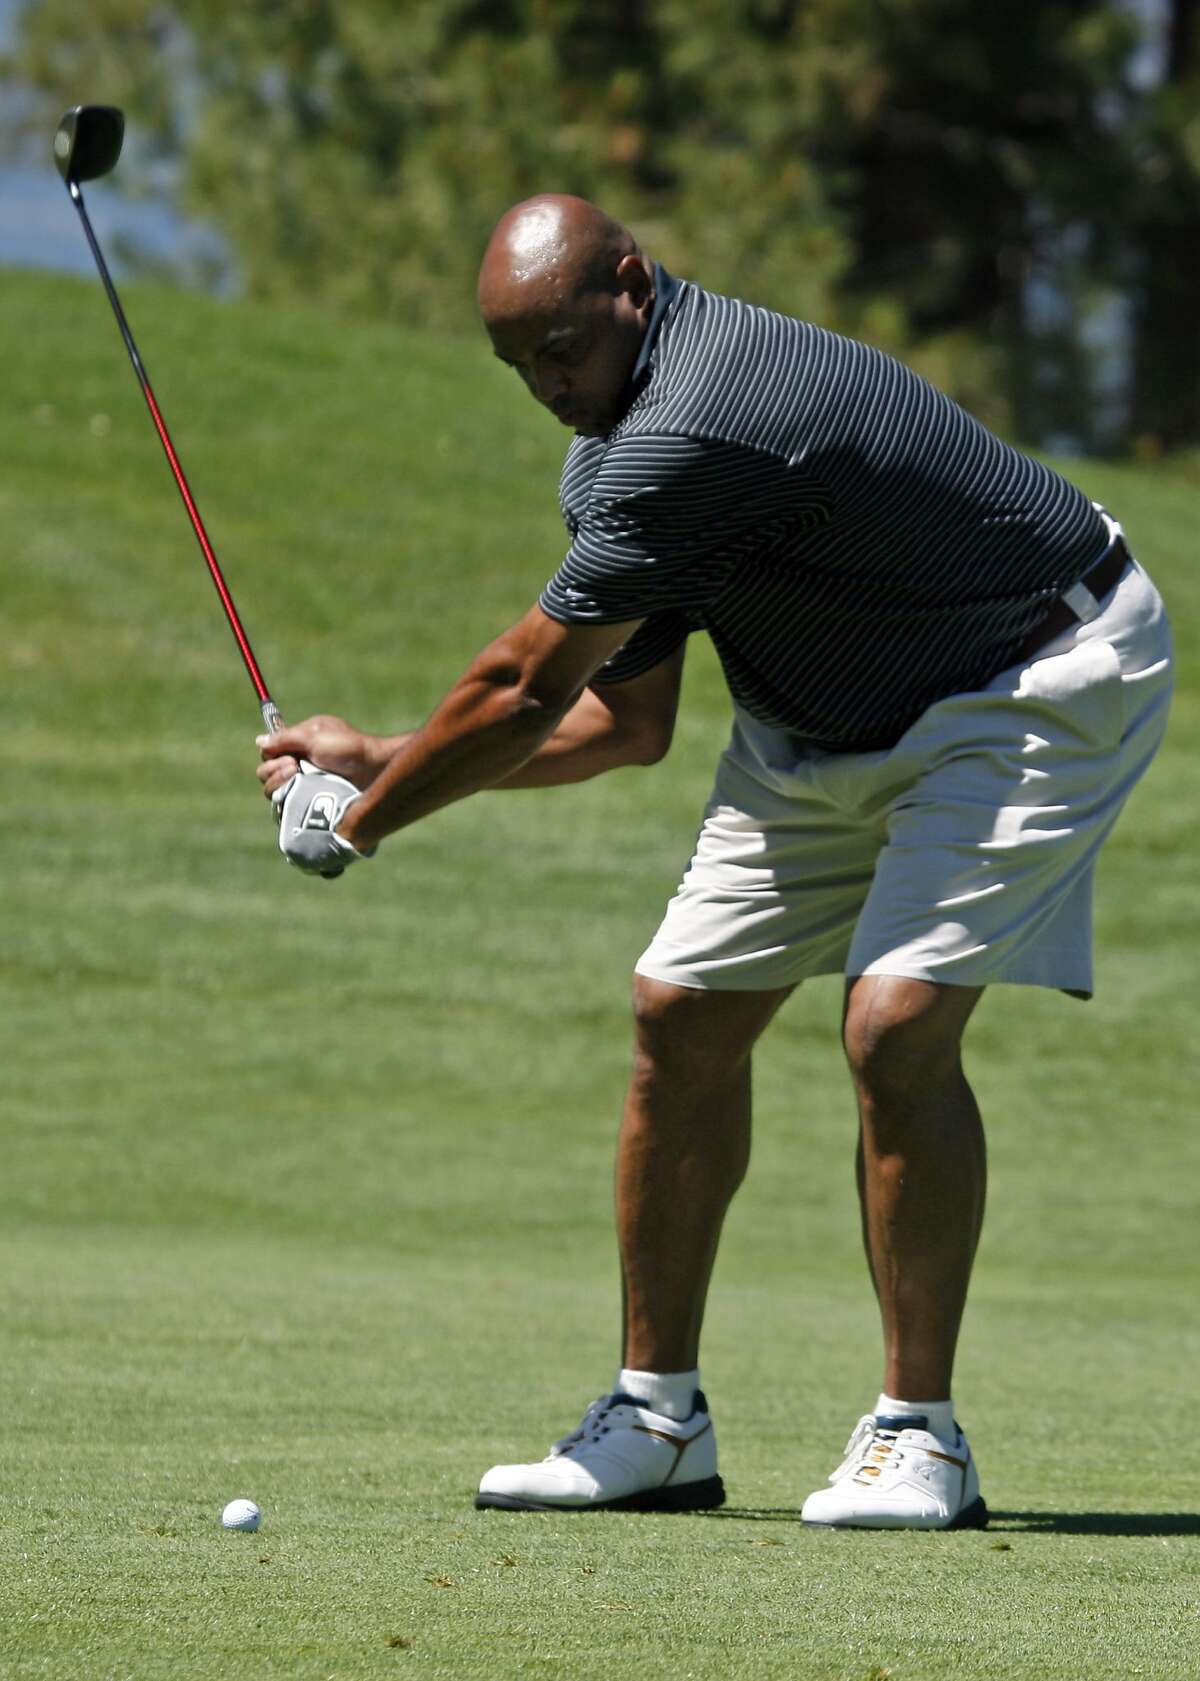 Charles Barkley, hits his second shot on the second hole during practice rounds at the 20th annual Celebrity Pro-Am American Century Championship at Edgewood Tahoe Golf Course. Thursday July 16, 2009